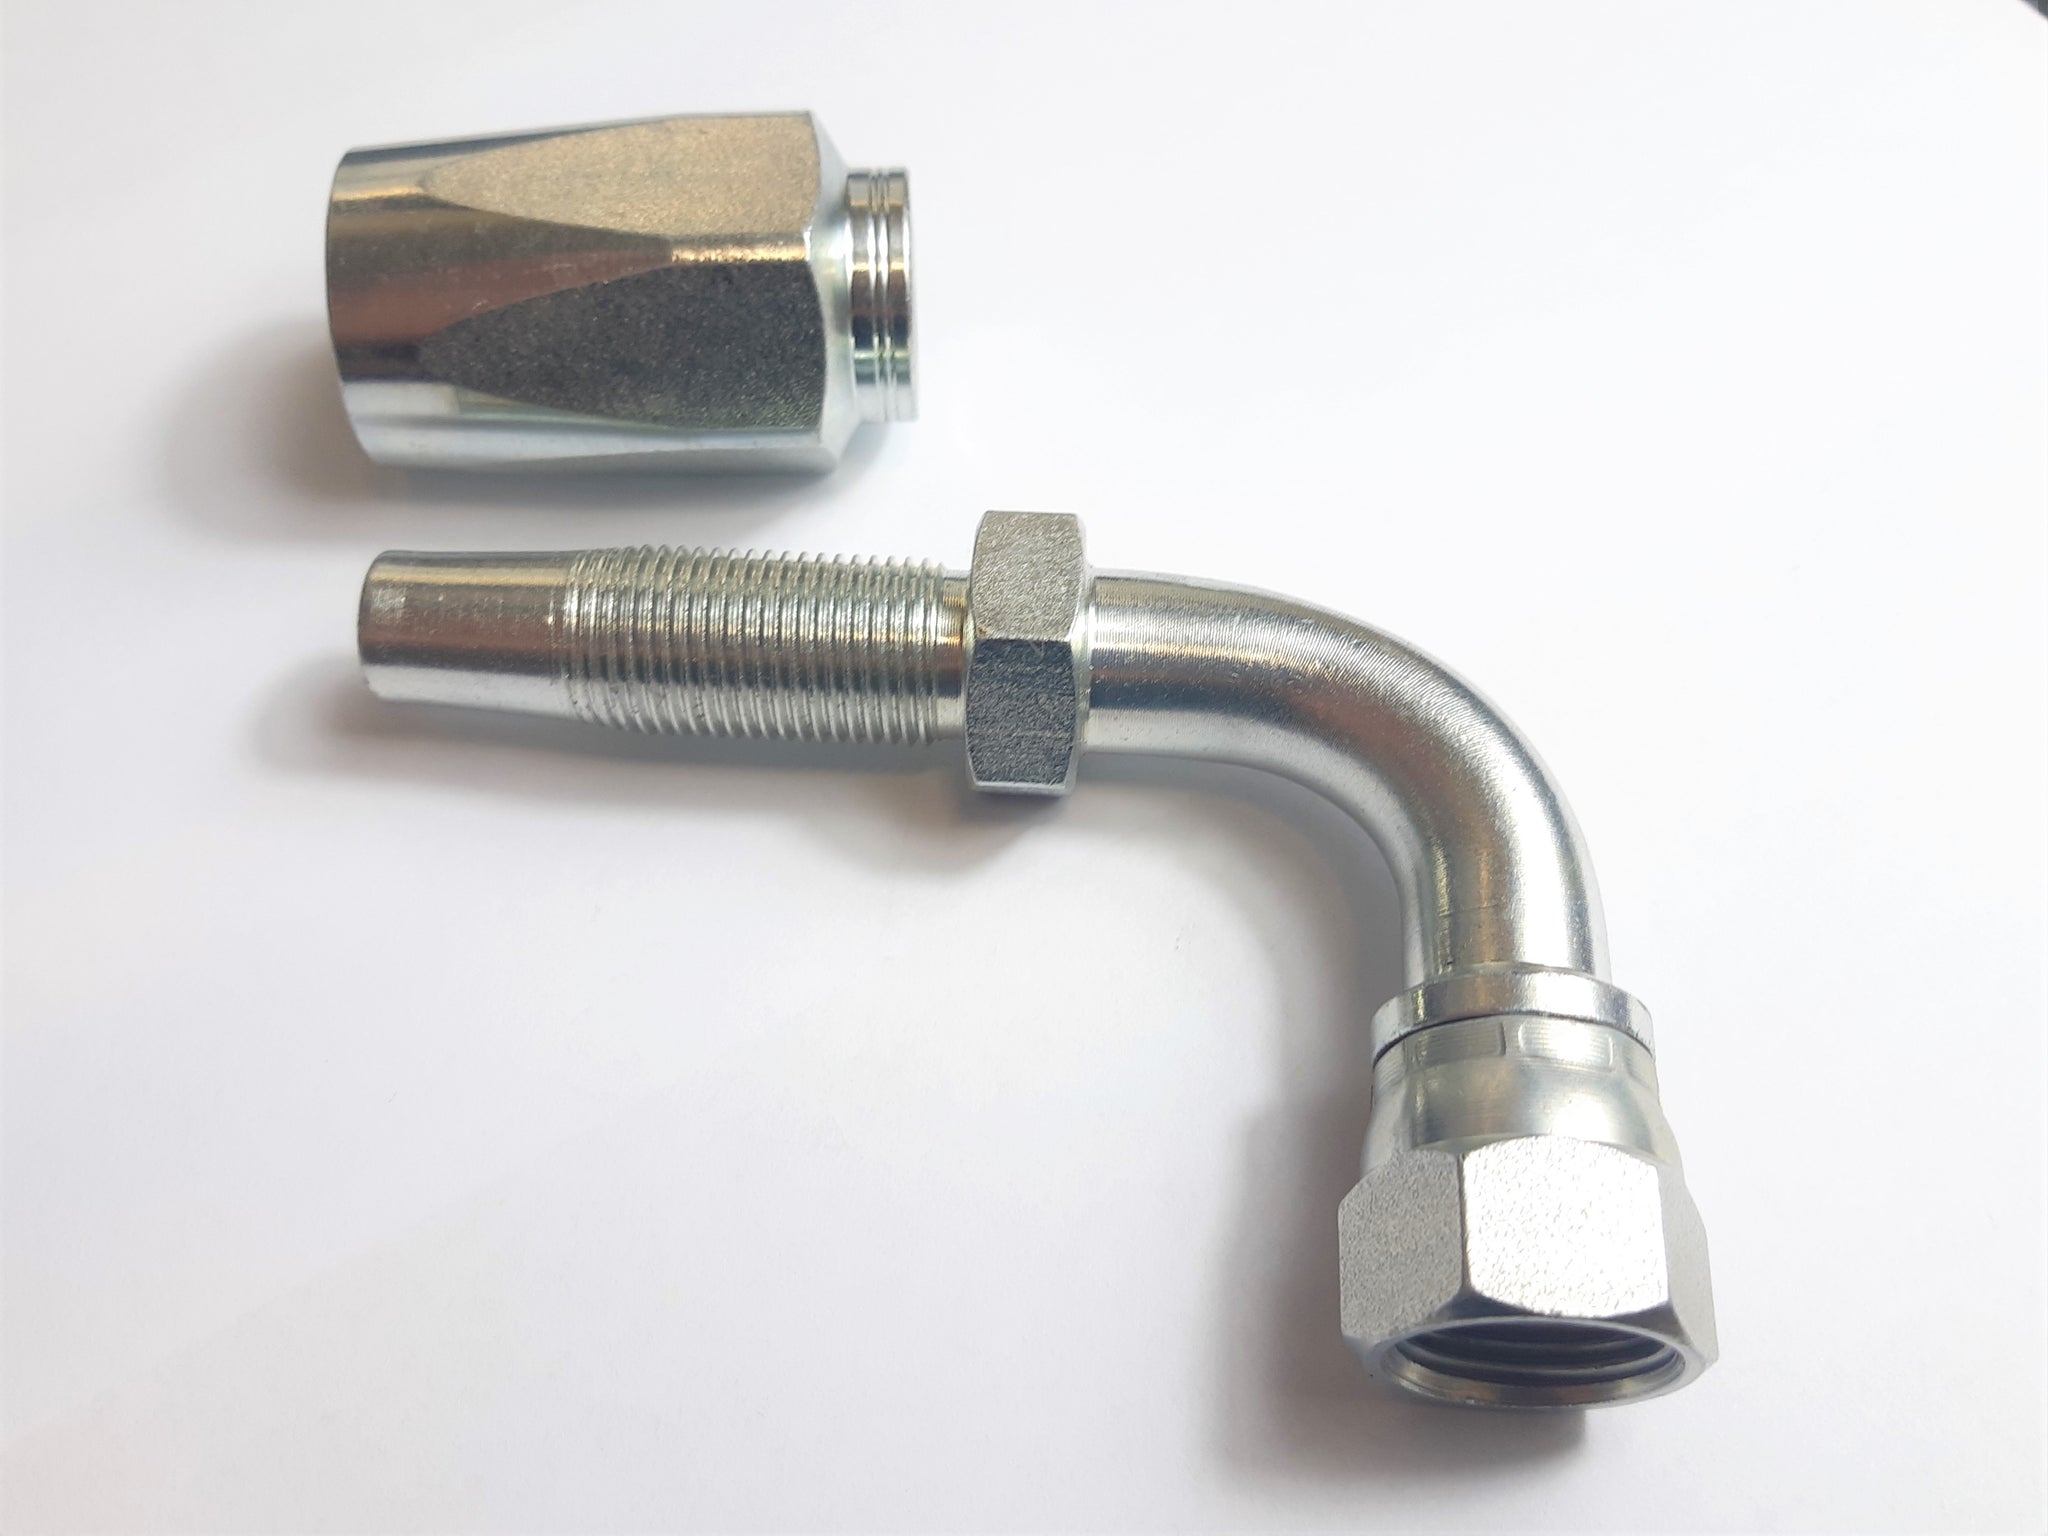 REUSABLE MALE AND FEMALE JIC HYDRAULIC HOSE FITTINGS FOR TWO WIRE